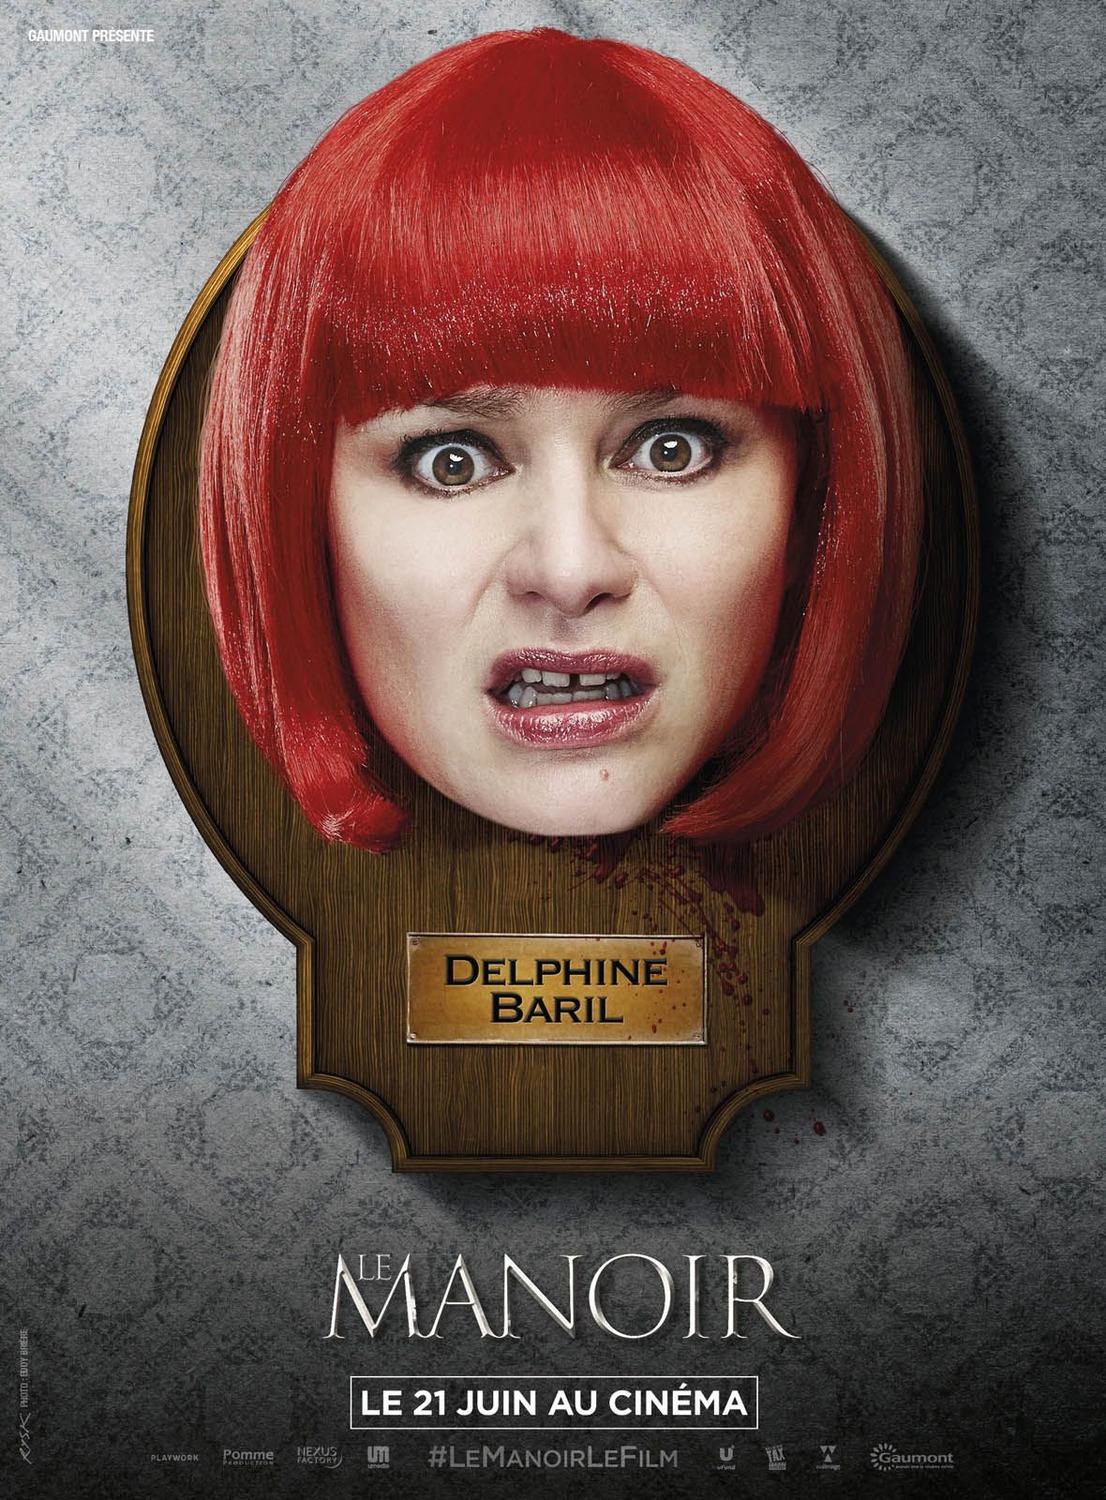 Extra Large Movie Poster Image for Le manoir (#8 of 11)